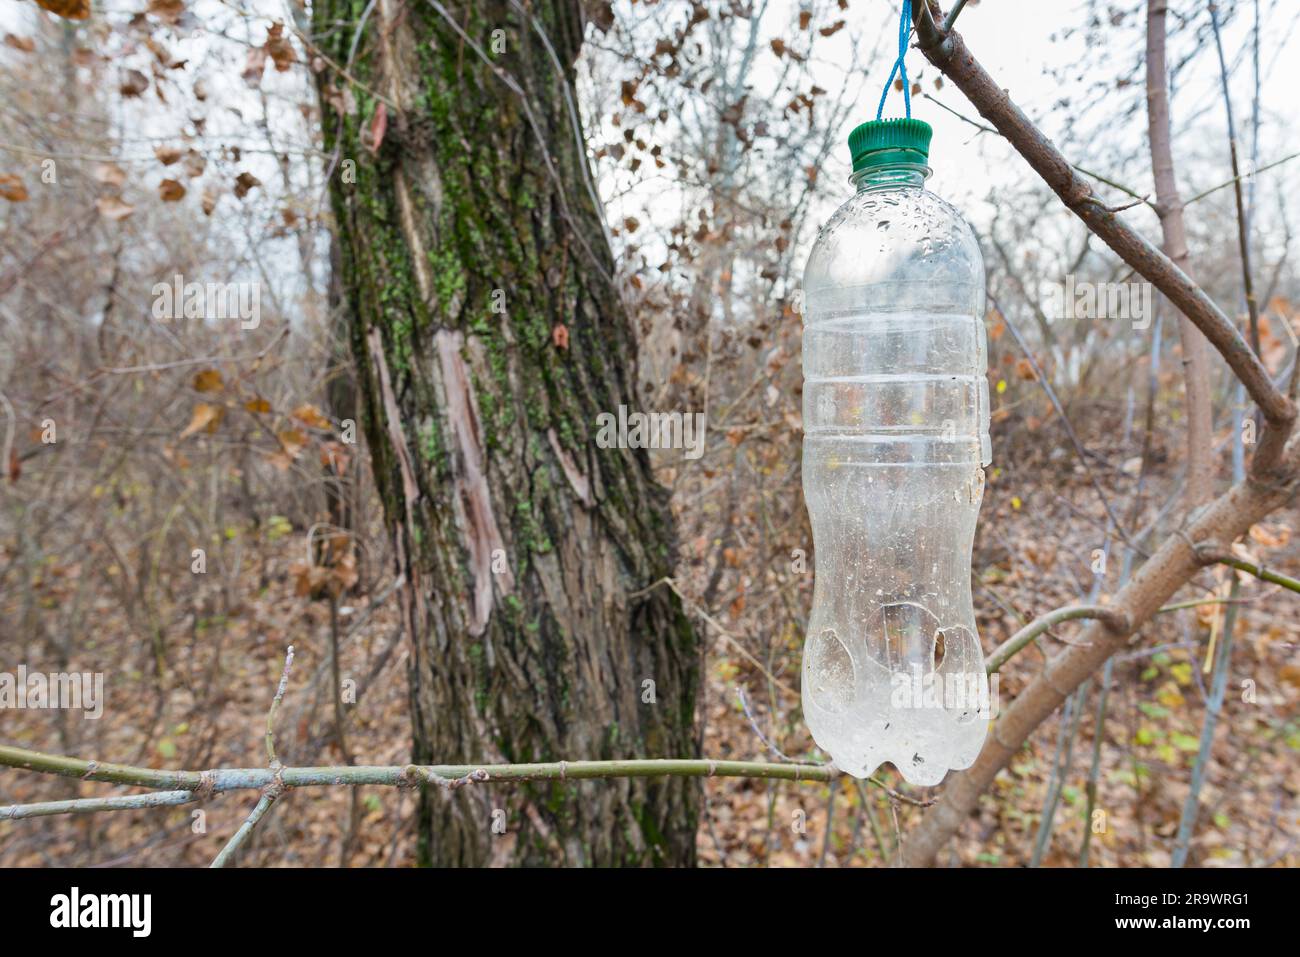 Plastic bottle, in the tree, used as feeder for birds in winter Stock Photo